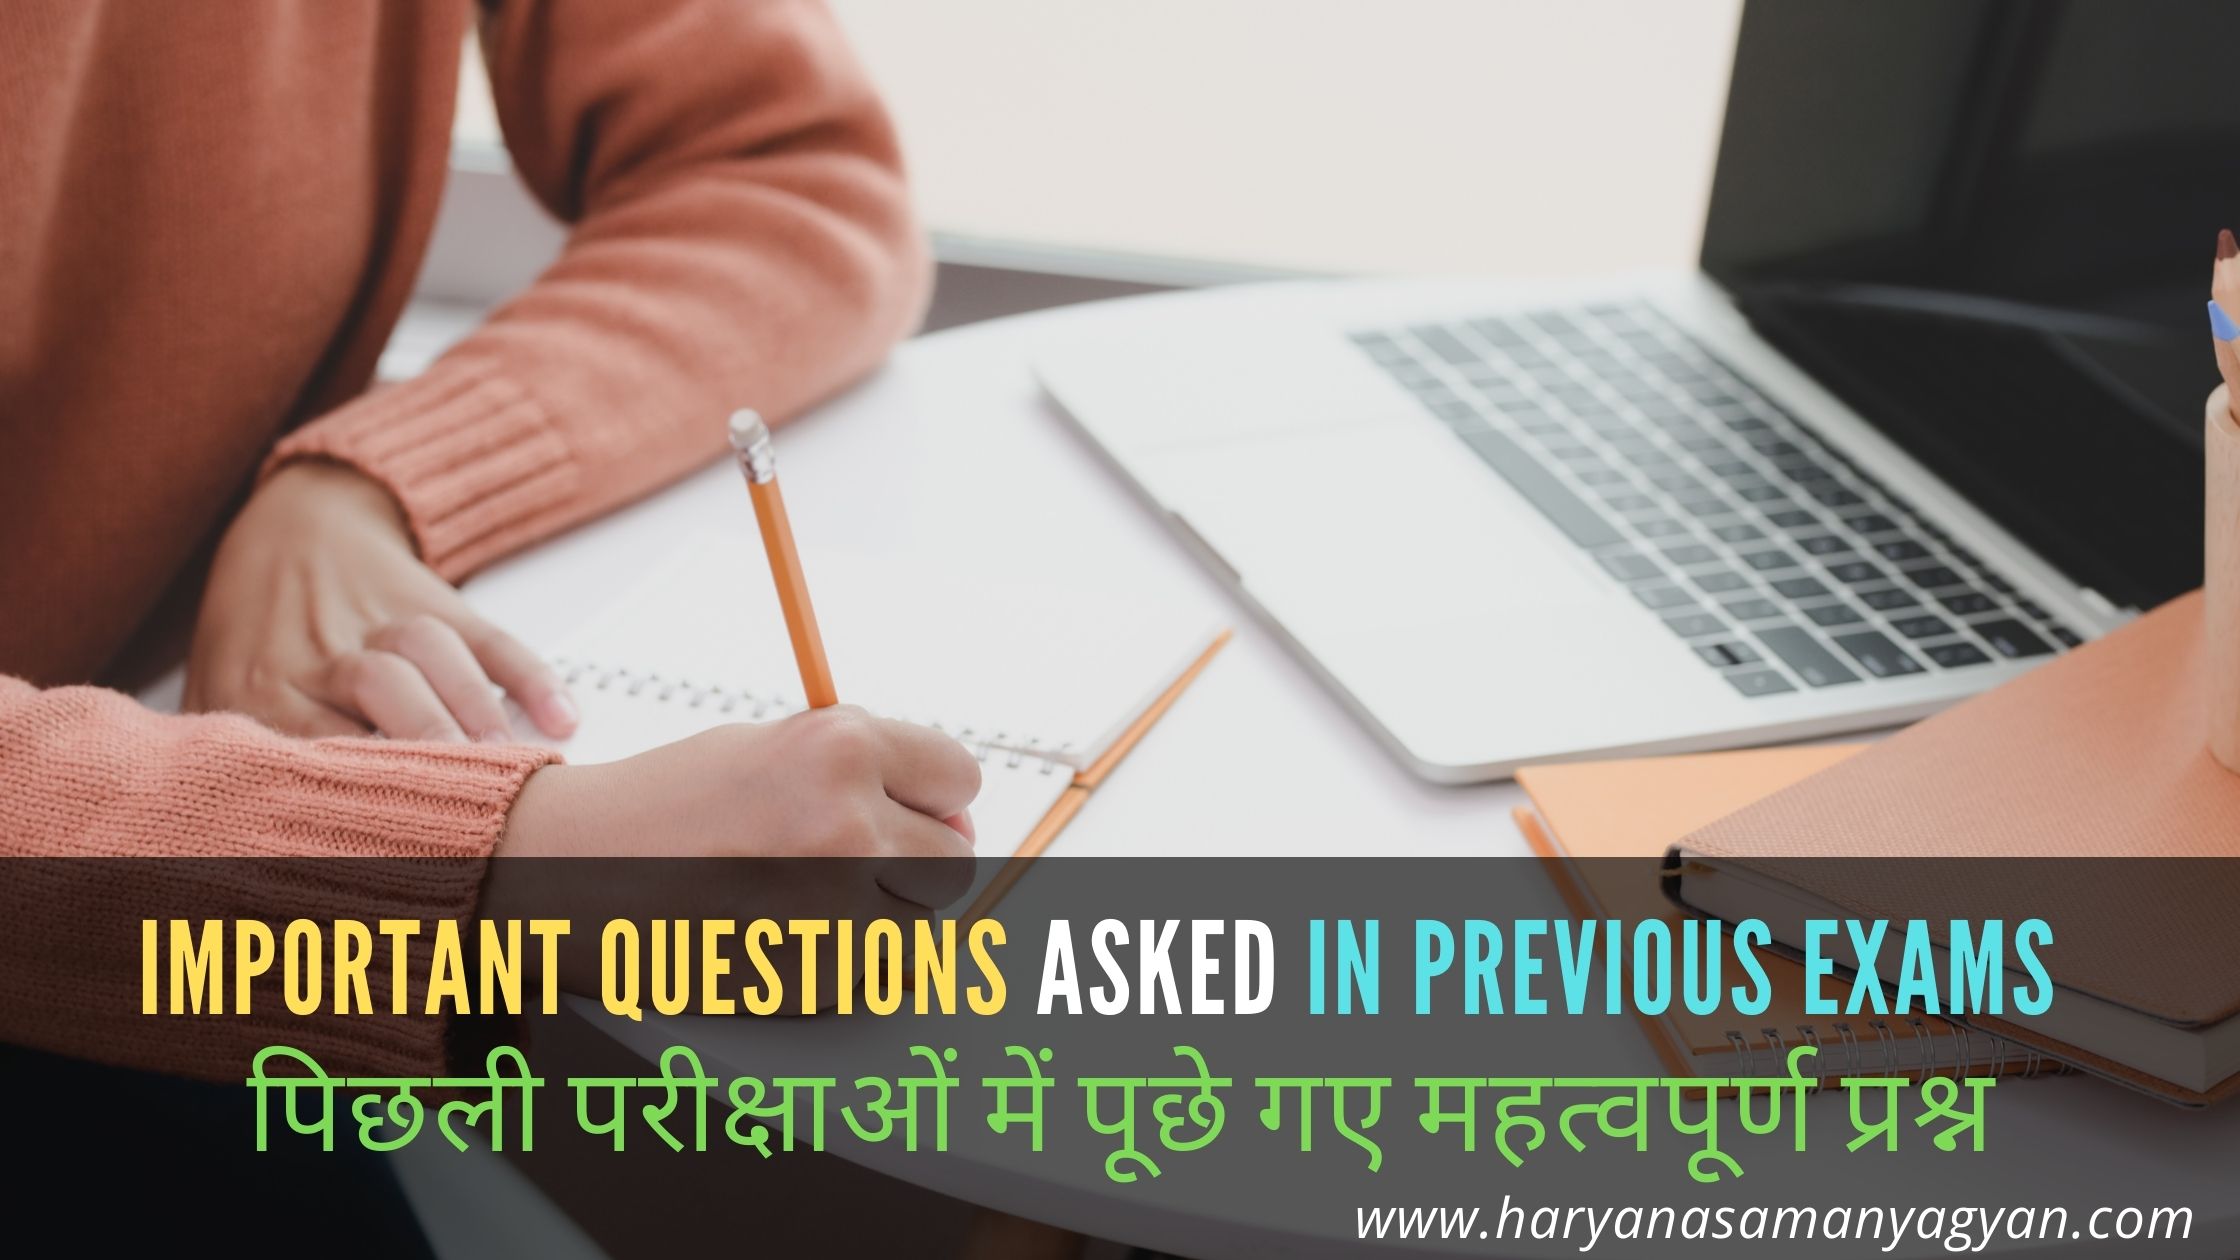 Questions asked in previous HSSC exams - Haryana GK online